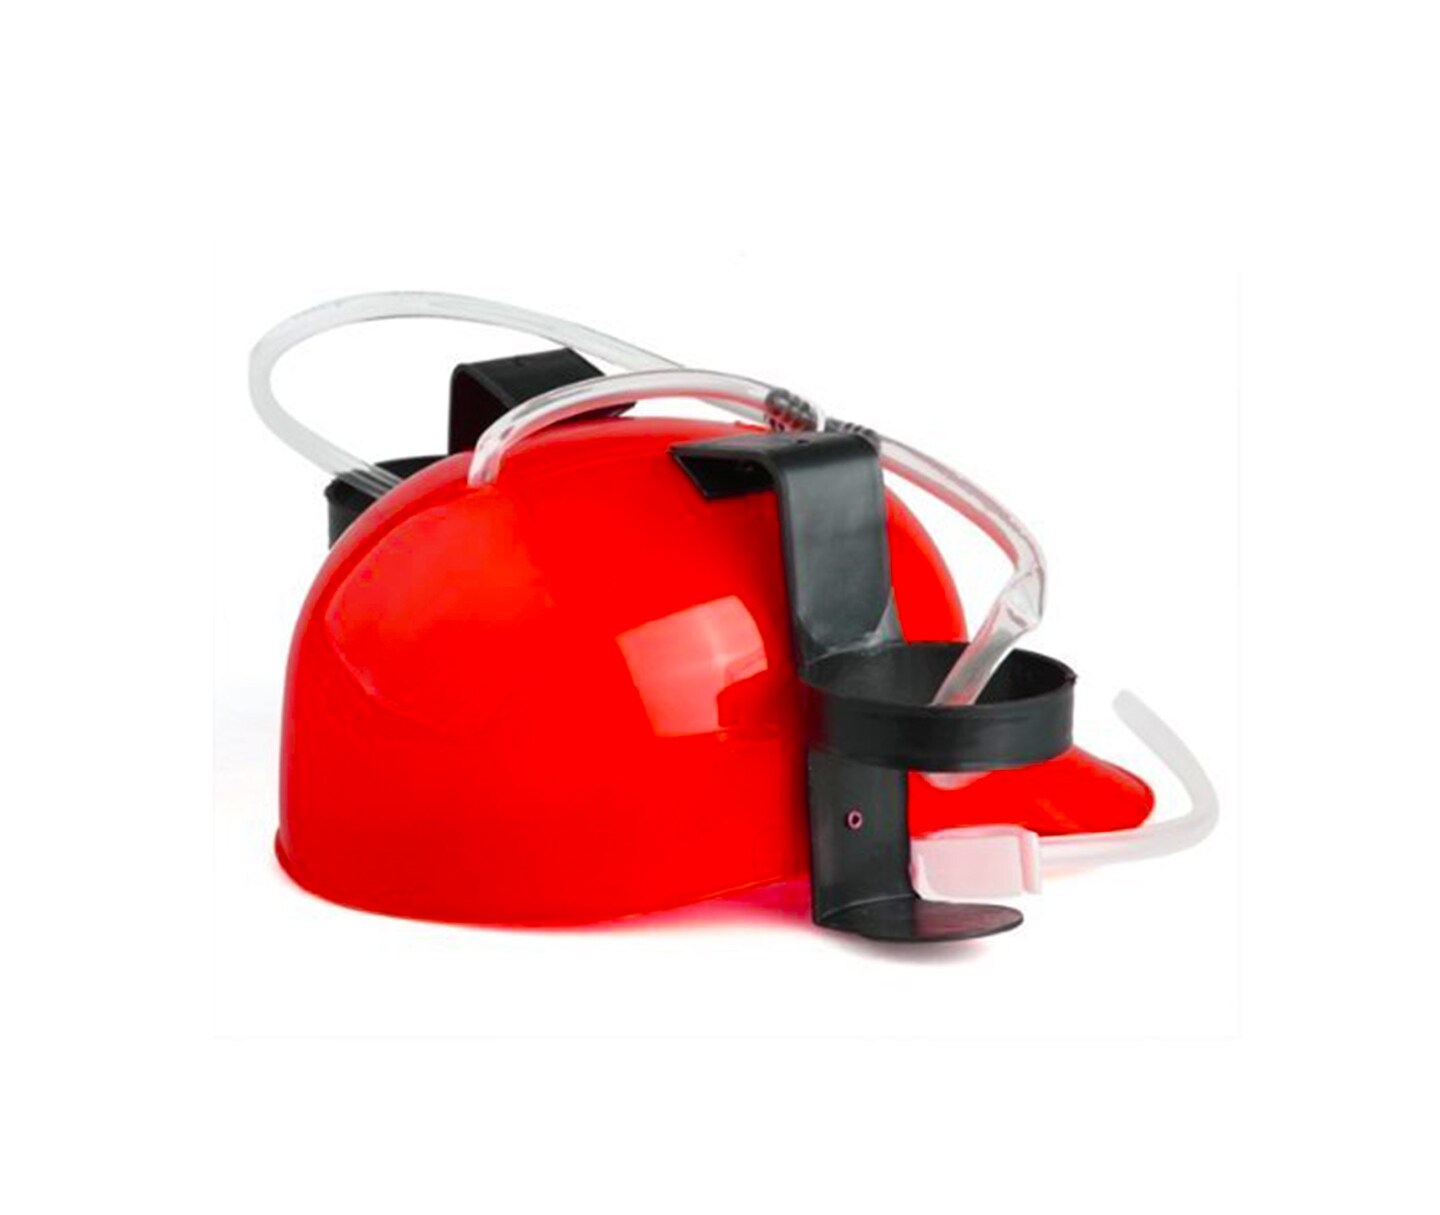 Novelty Place Drinking Helmet Can Holder Drinker Hat Cap Party Hat